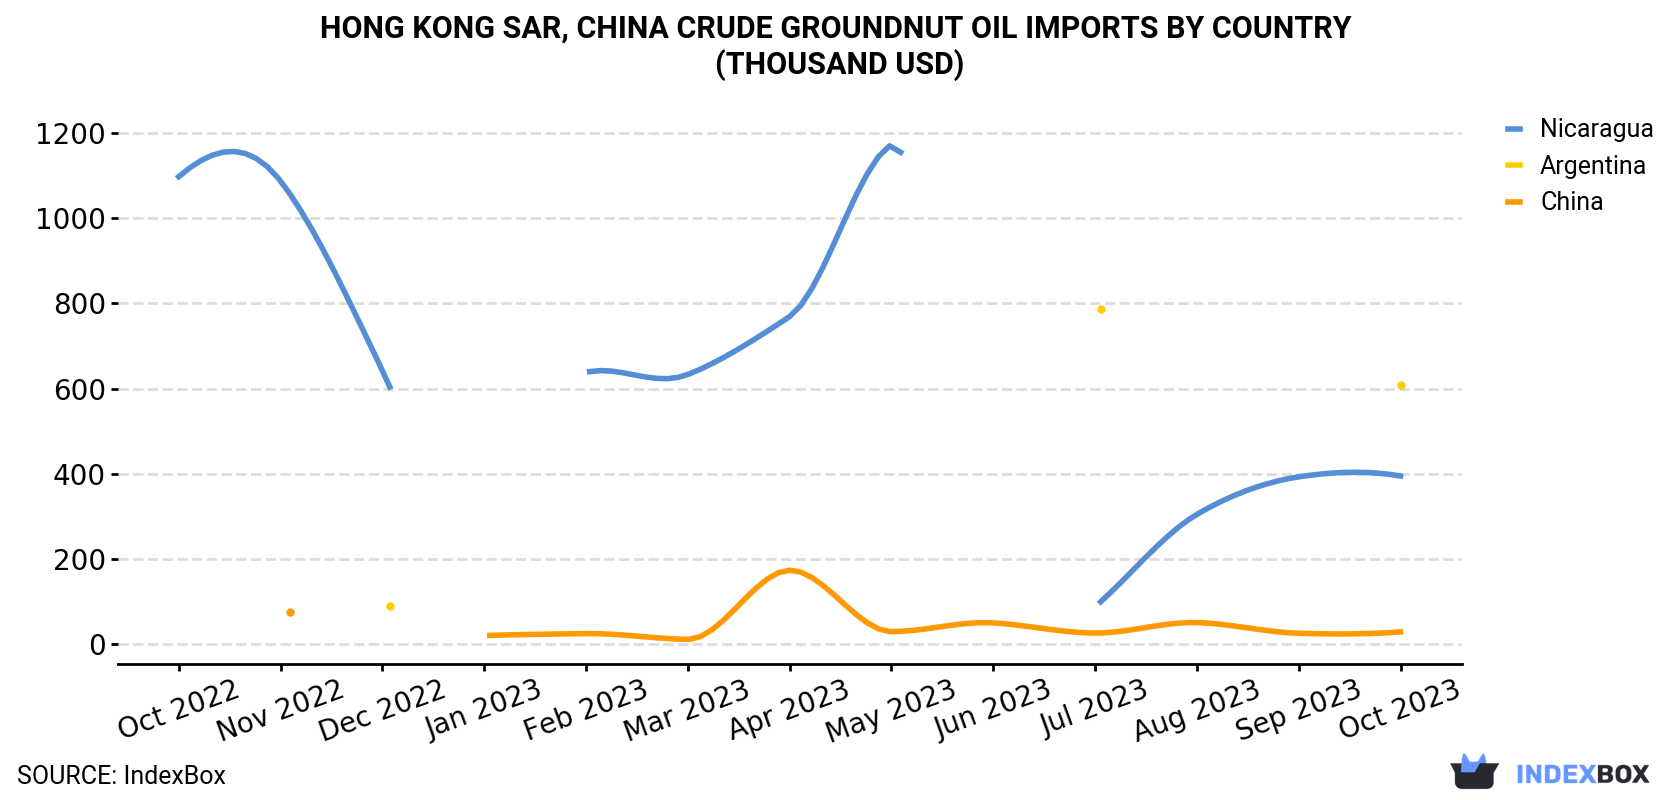 Hong Kong Crude Groundnut Oil Imports By Country (Thousand USD)